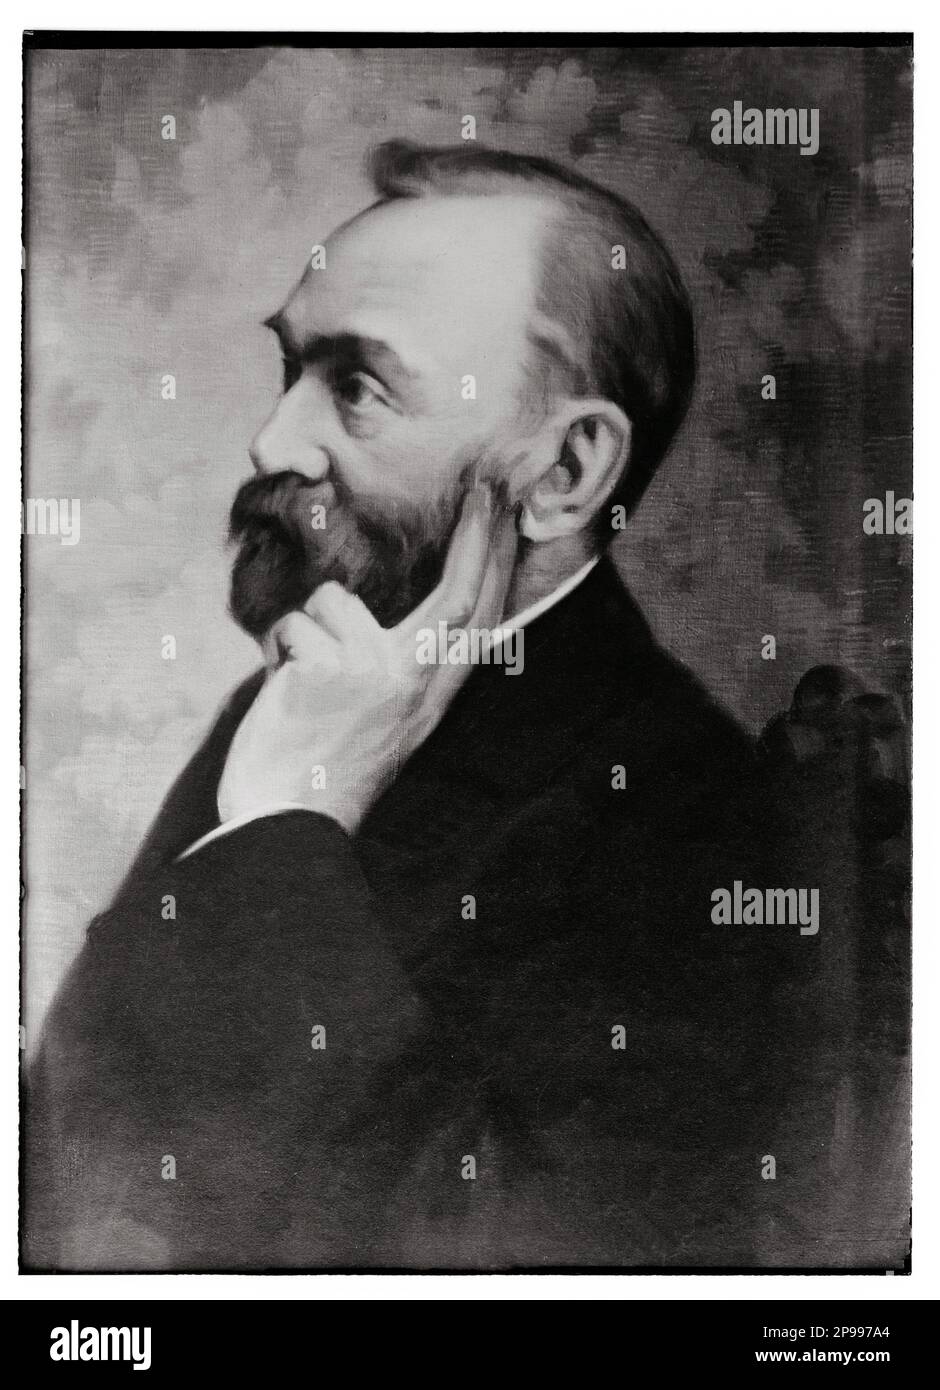 1889 :  Portrait painting of celebrated swedish chimist and  inventor  ALFRED NOBEL ( 1833 - 1896 ) . Engineer, innovator, armaments manufacturer and the inventor of dynamite. He owned Bofors, a major armaments manufacturer, which he had redirected from its previous role as an iron and steel mill. In his last will, he used his enormous fortune to institute the Nobel Prizes . The synthetic element Nobelium was named after him. - foto storiche - foto storica  - scienziato - scientist  - portrait - ritratto  - SCIENZIATO - SCIENTIST - DINAMITE - DYNAMITE  - beard  - PREMIO NOBEL - beard - barba - Stock Photo